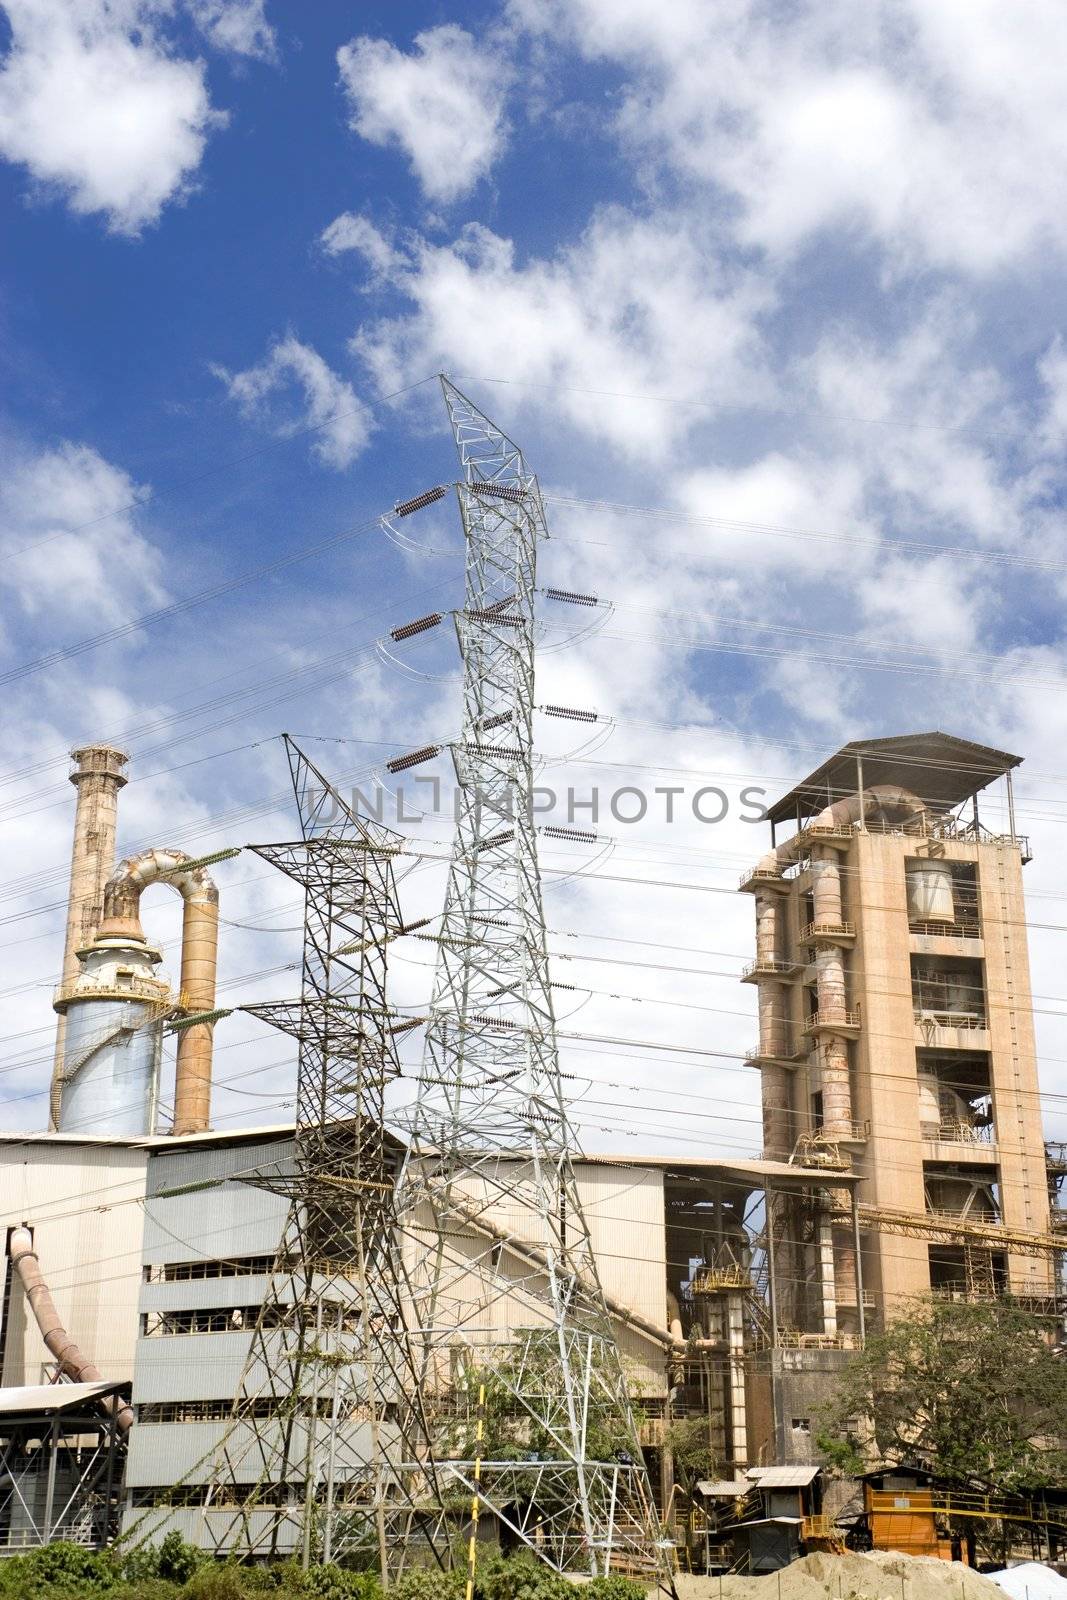 Image of a cement factory and power lines in Malaysia.